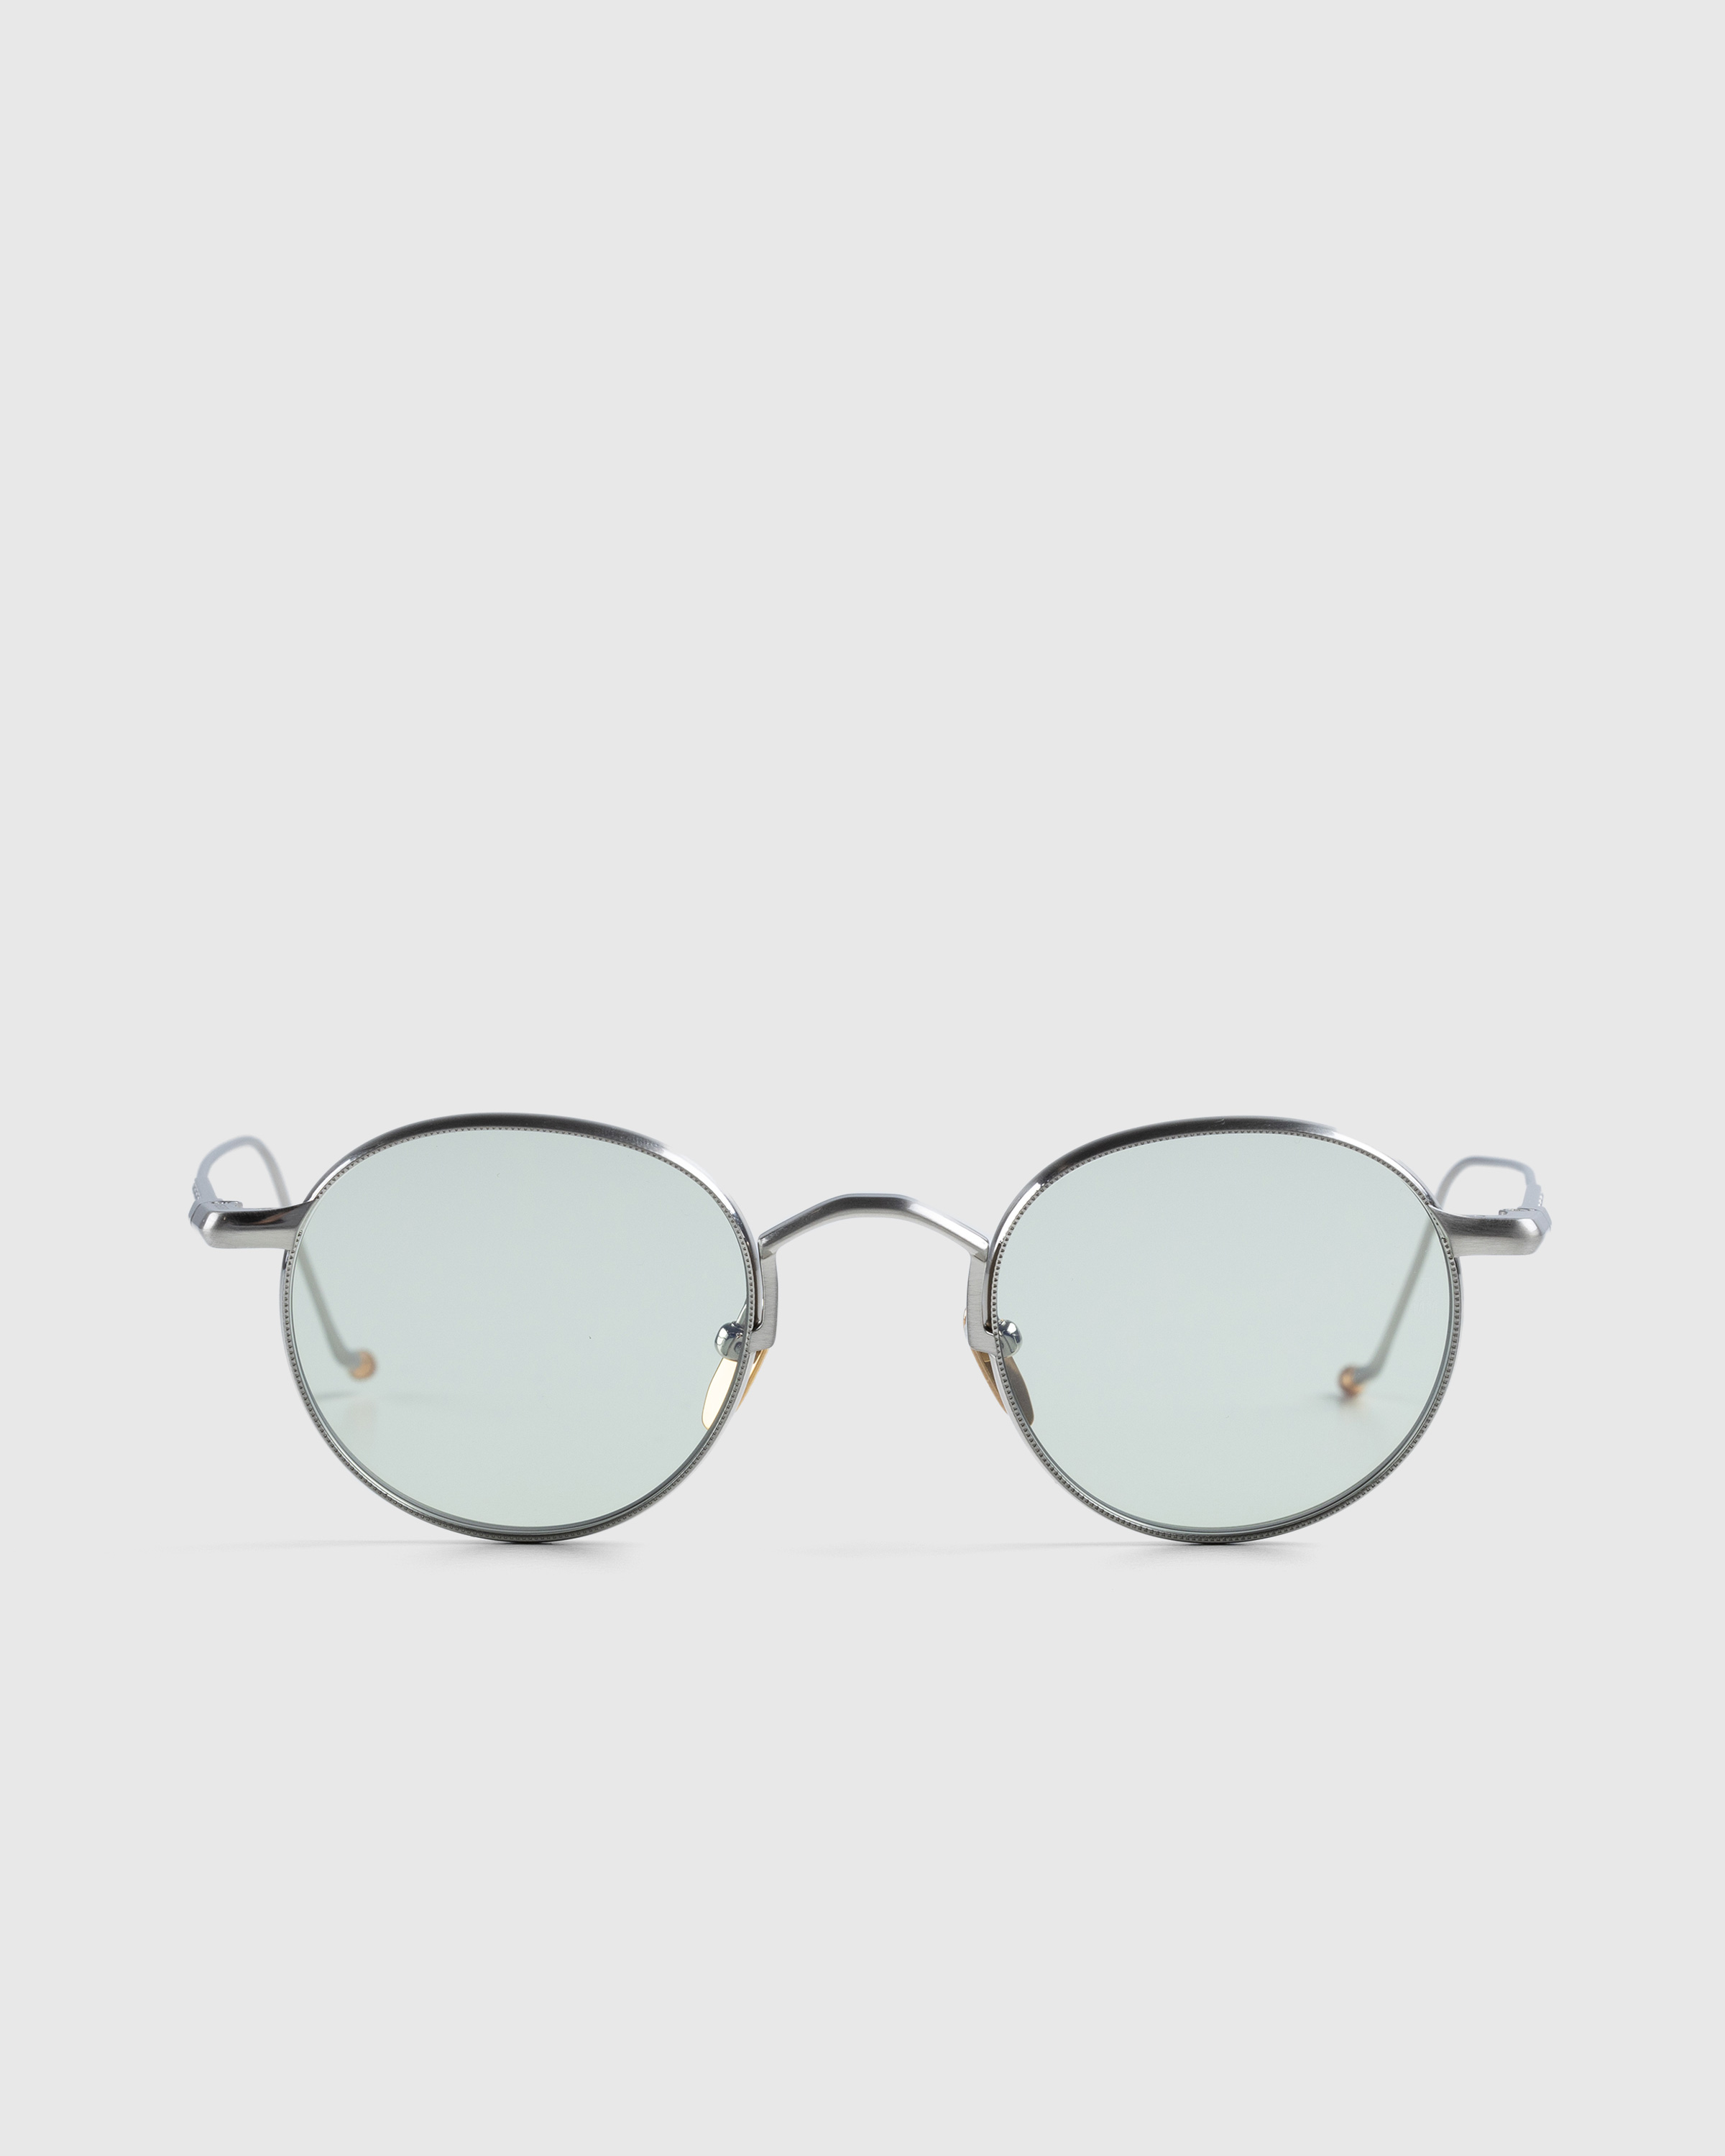 Jacques Marie Mage – Full Metal Jacket Silver - Sunglasses - Silver - Image 1